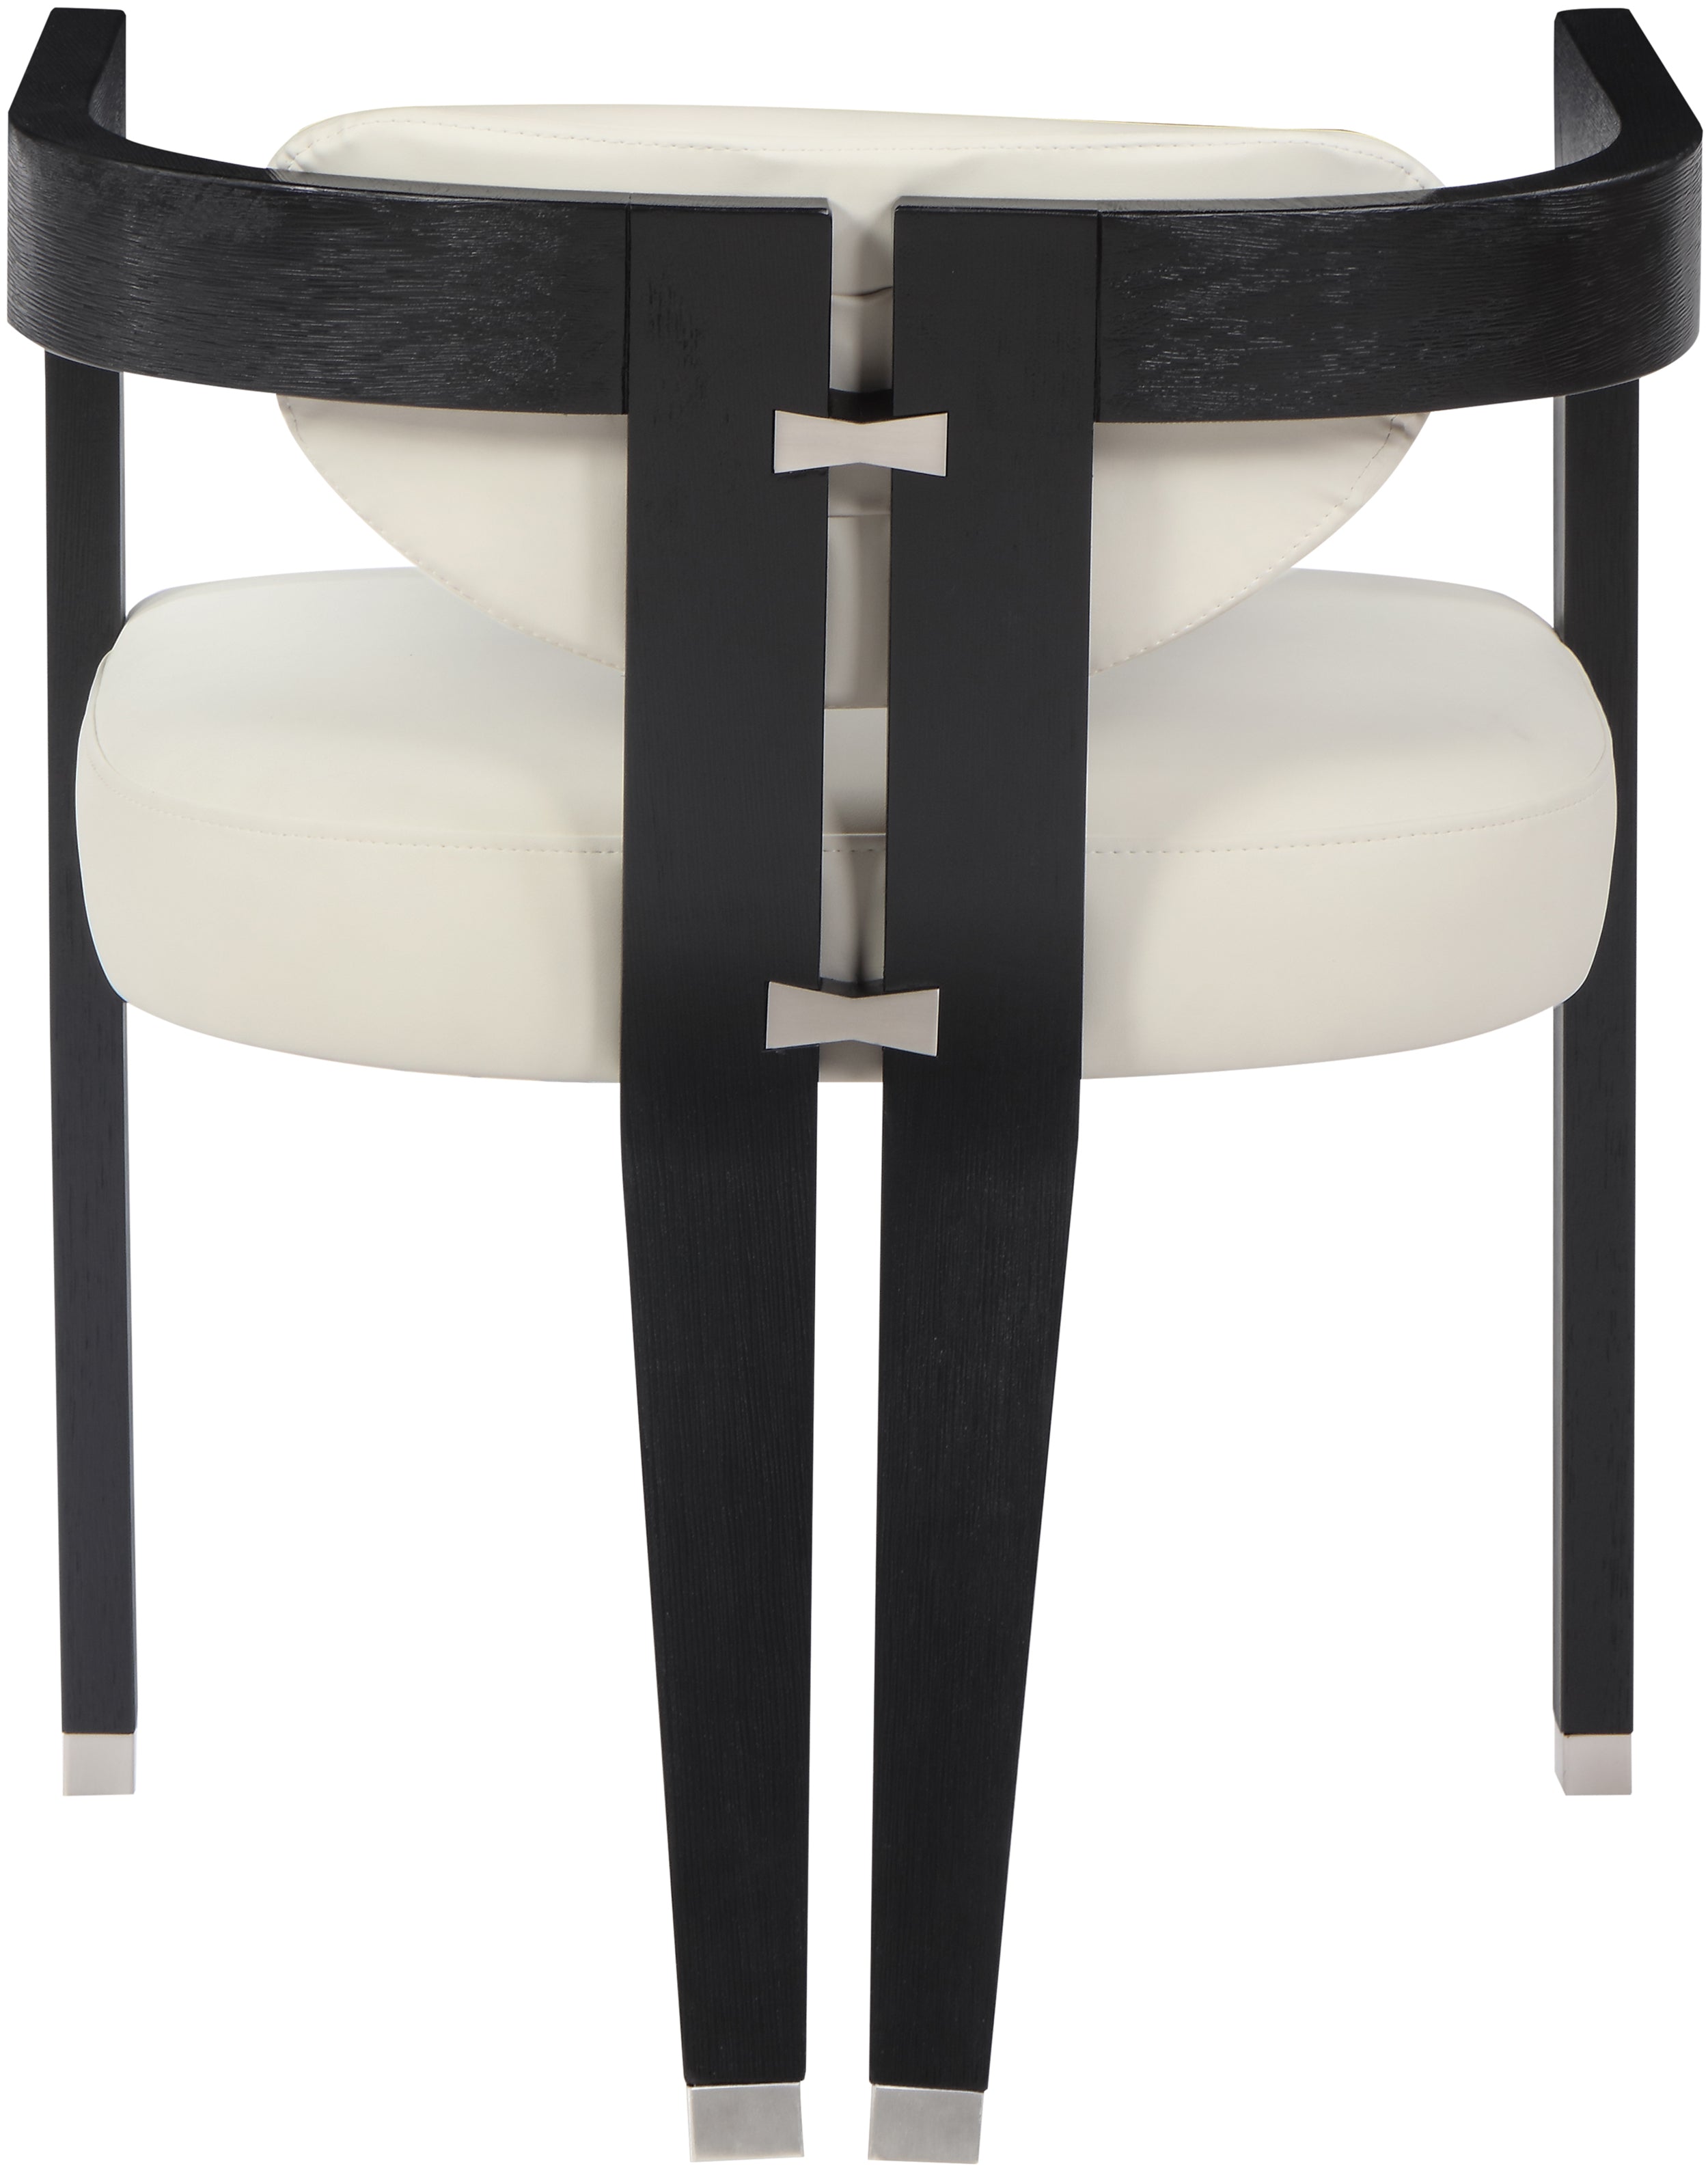 Carlyle Faux Leather Dining Chair - Black